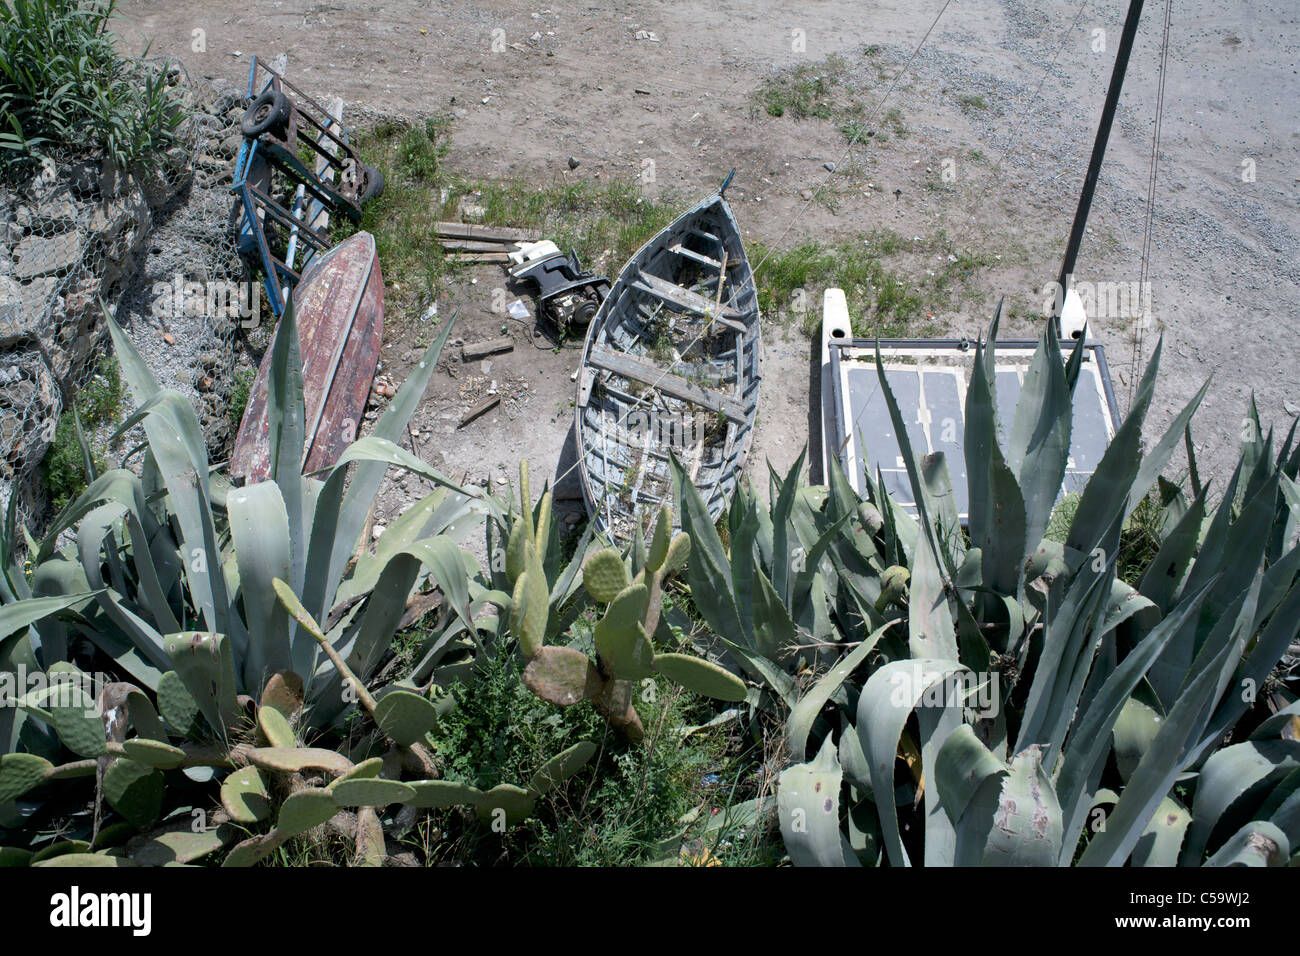 Cactus succulent plants by the sea shore beach with abandoned decaying boats Stock Photo